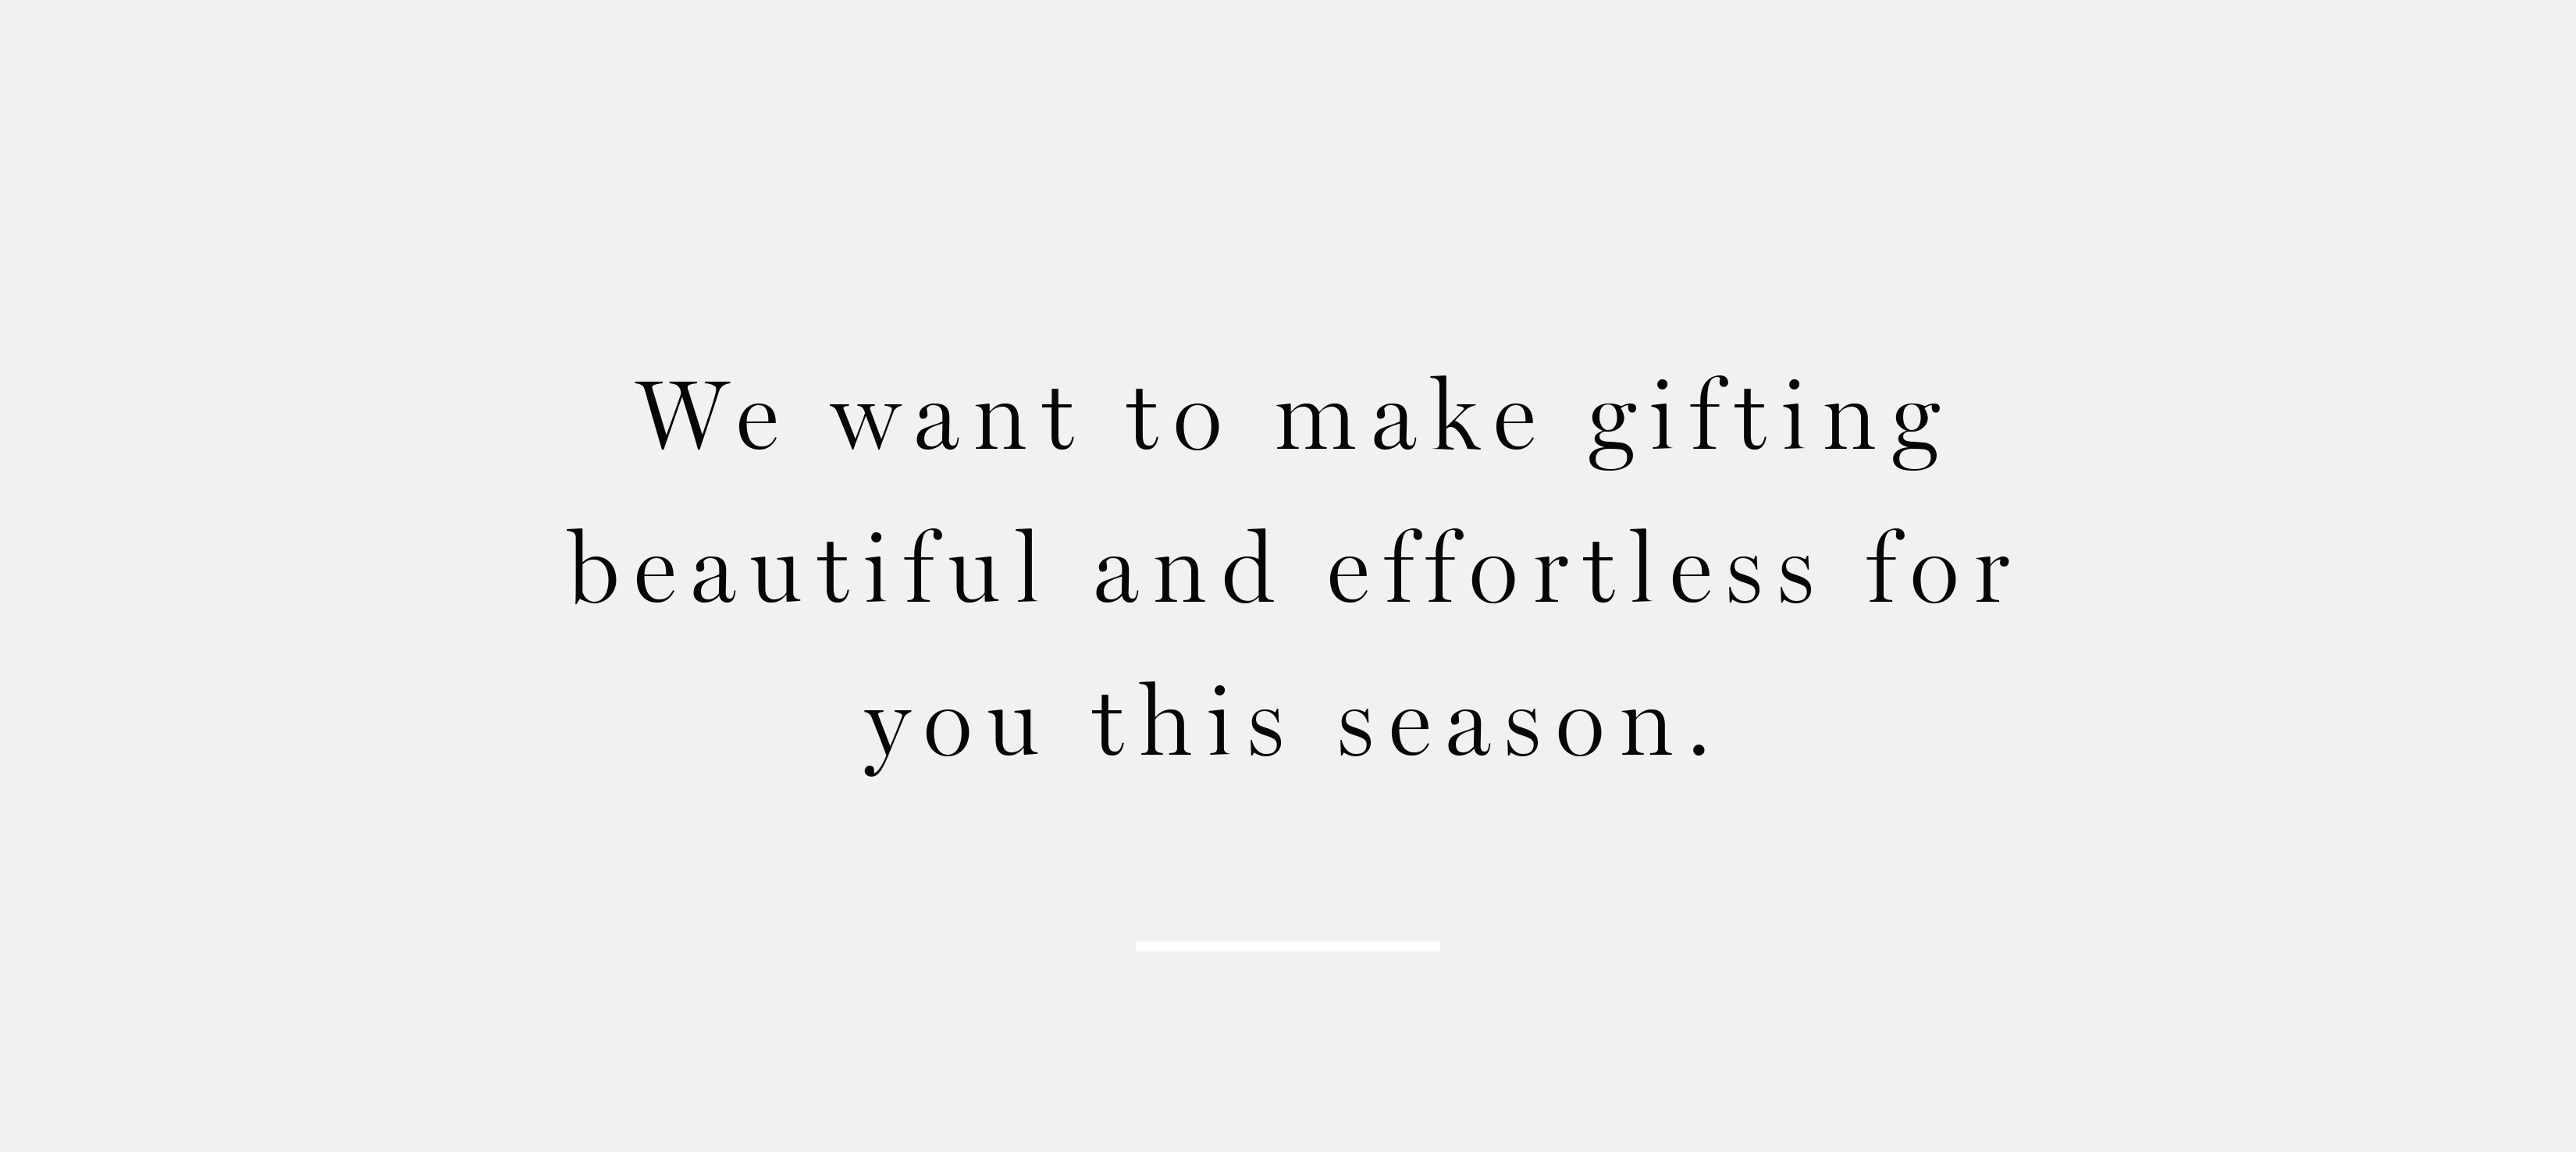 We''re here to help make gifting beautiful and effortless this season. 